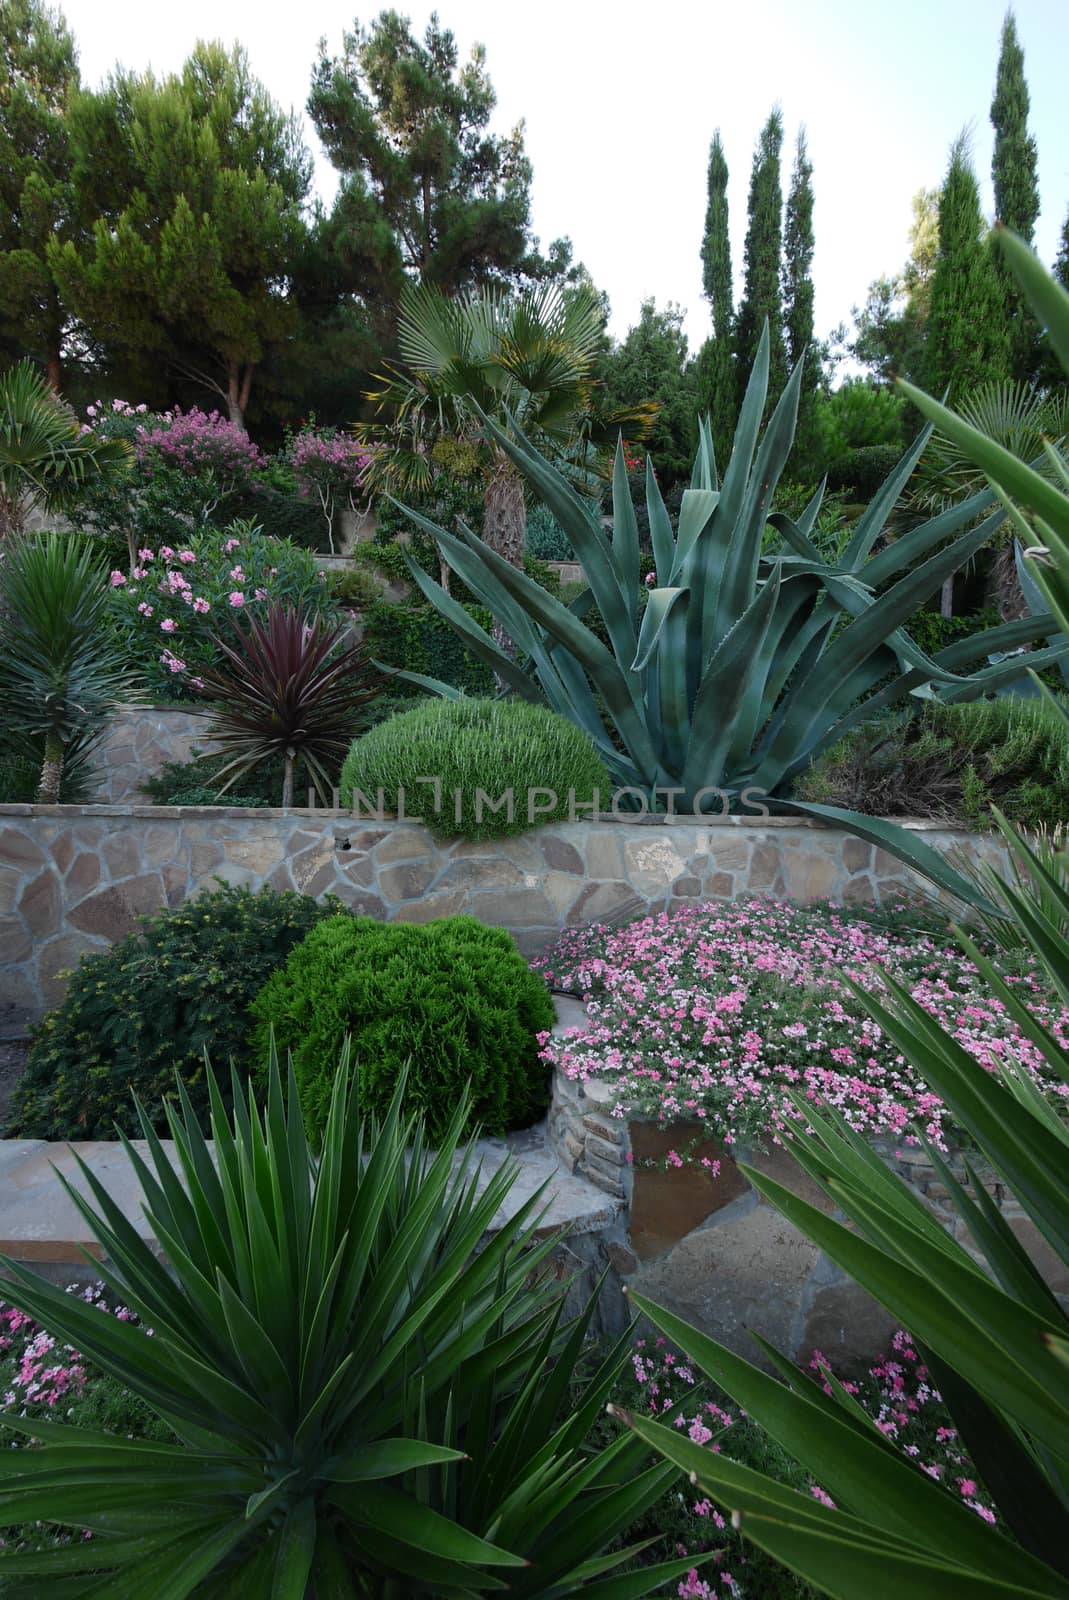 Stone fence with decorative flower beds, tall palms and green exotic plants by Adamchuk